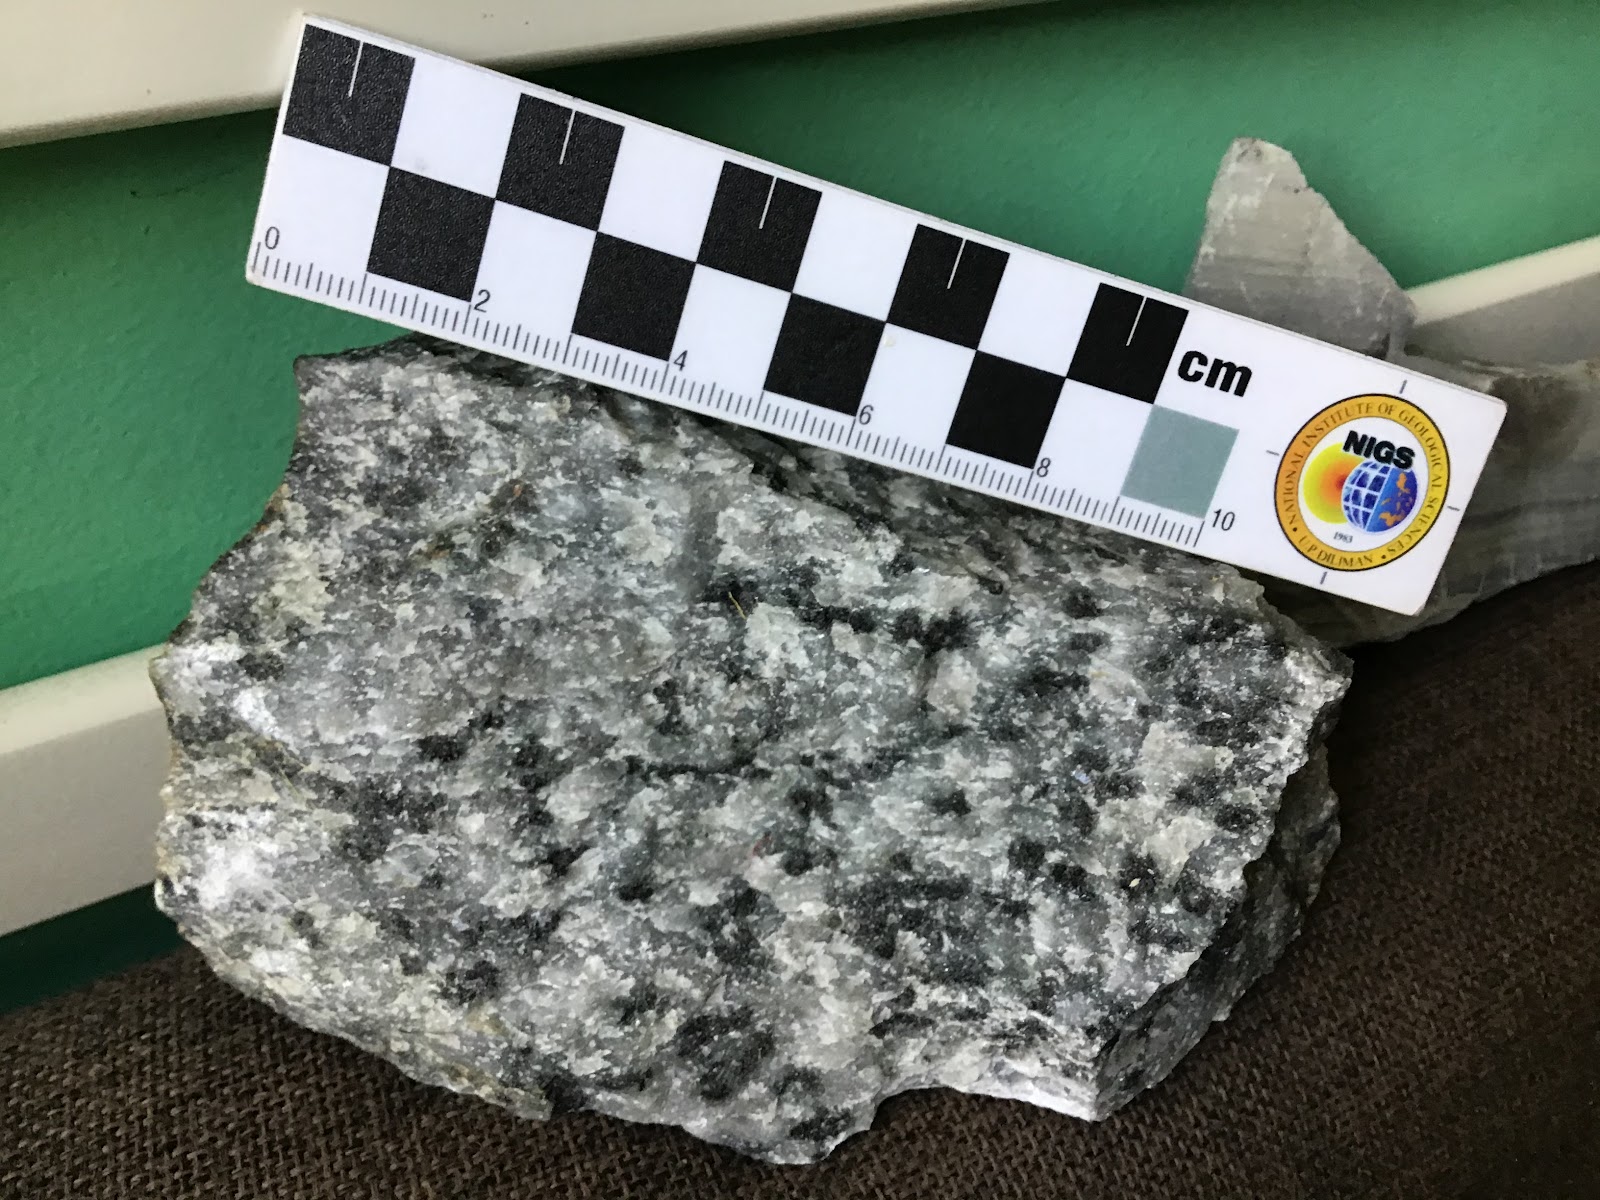 diorite rock from the fabulous scientist's collection